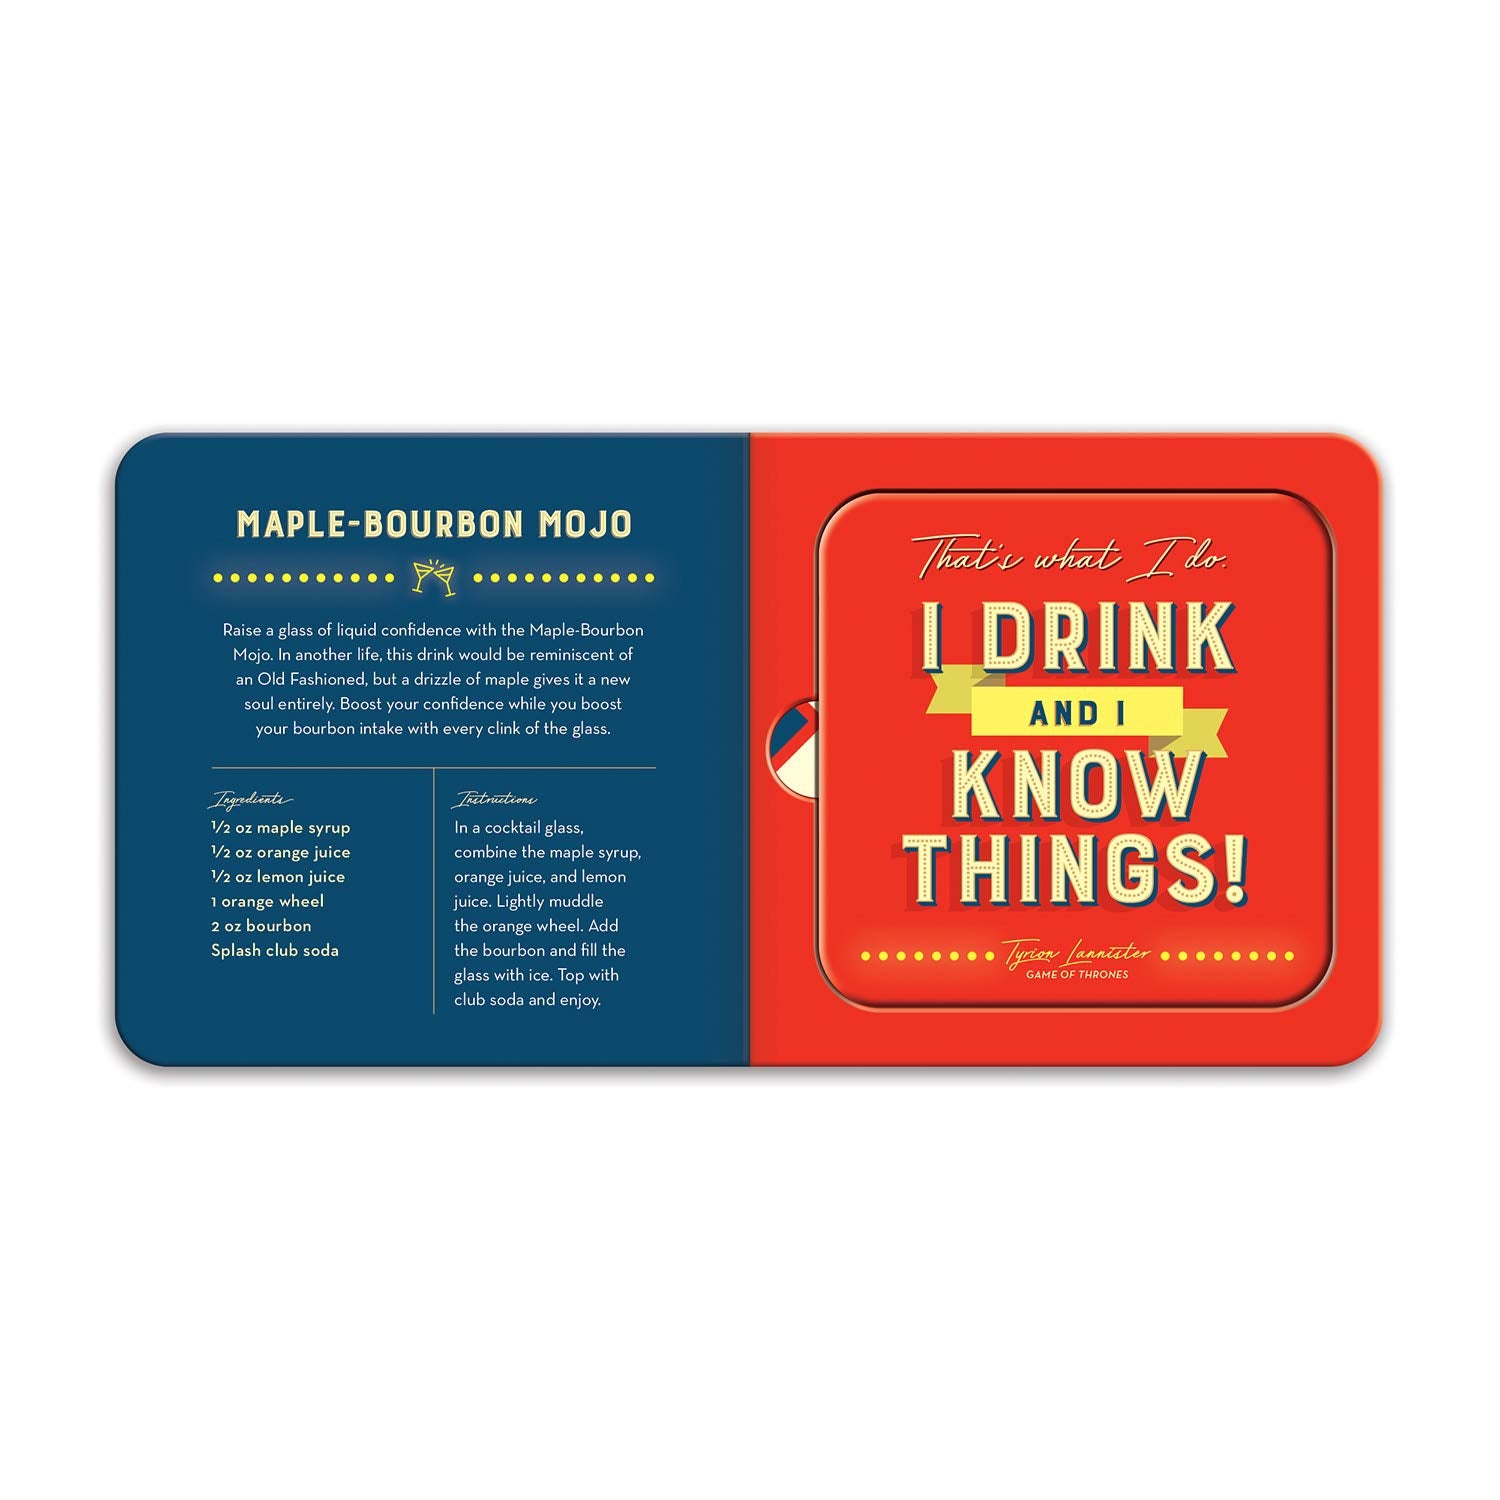 inside view of red and blue pages with a coaster on one side with text "i drink and i know things!"